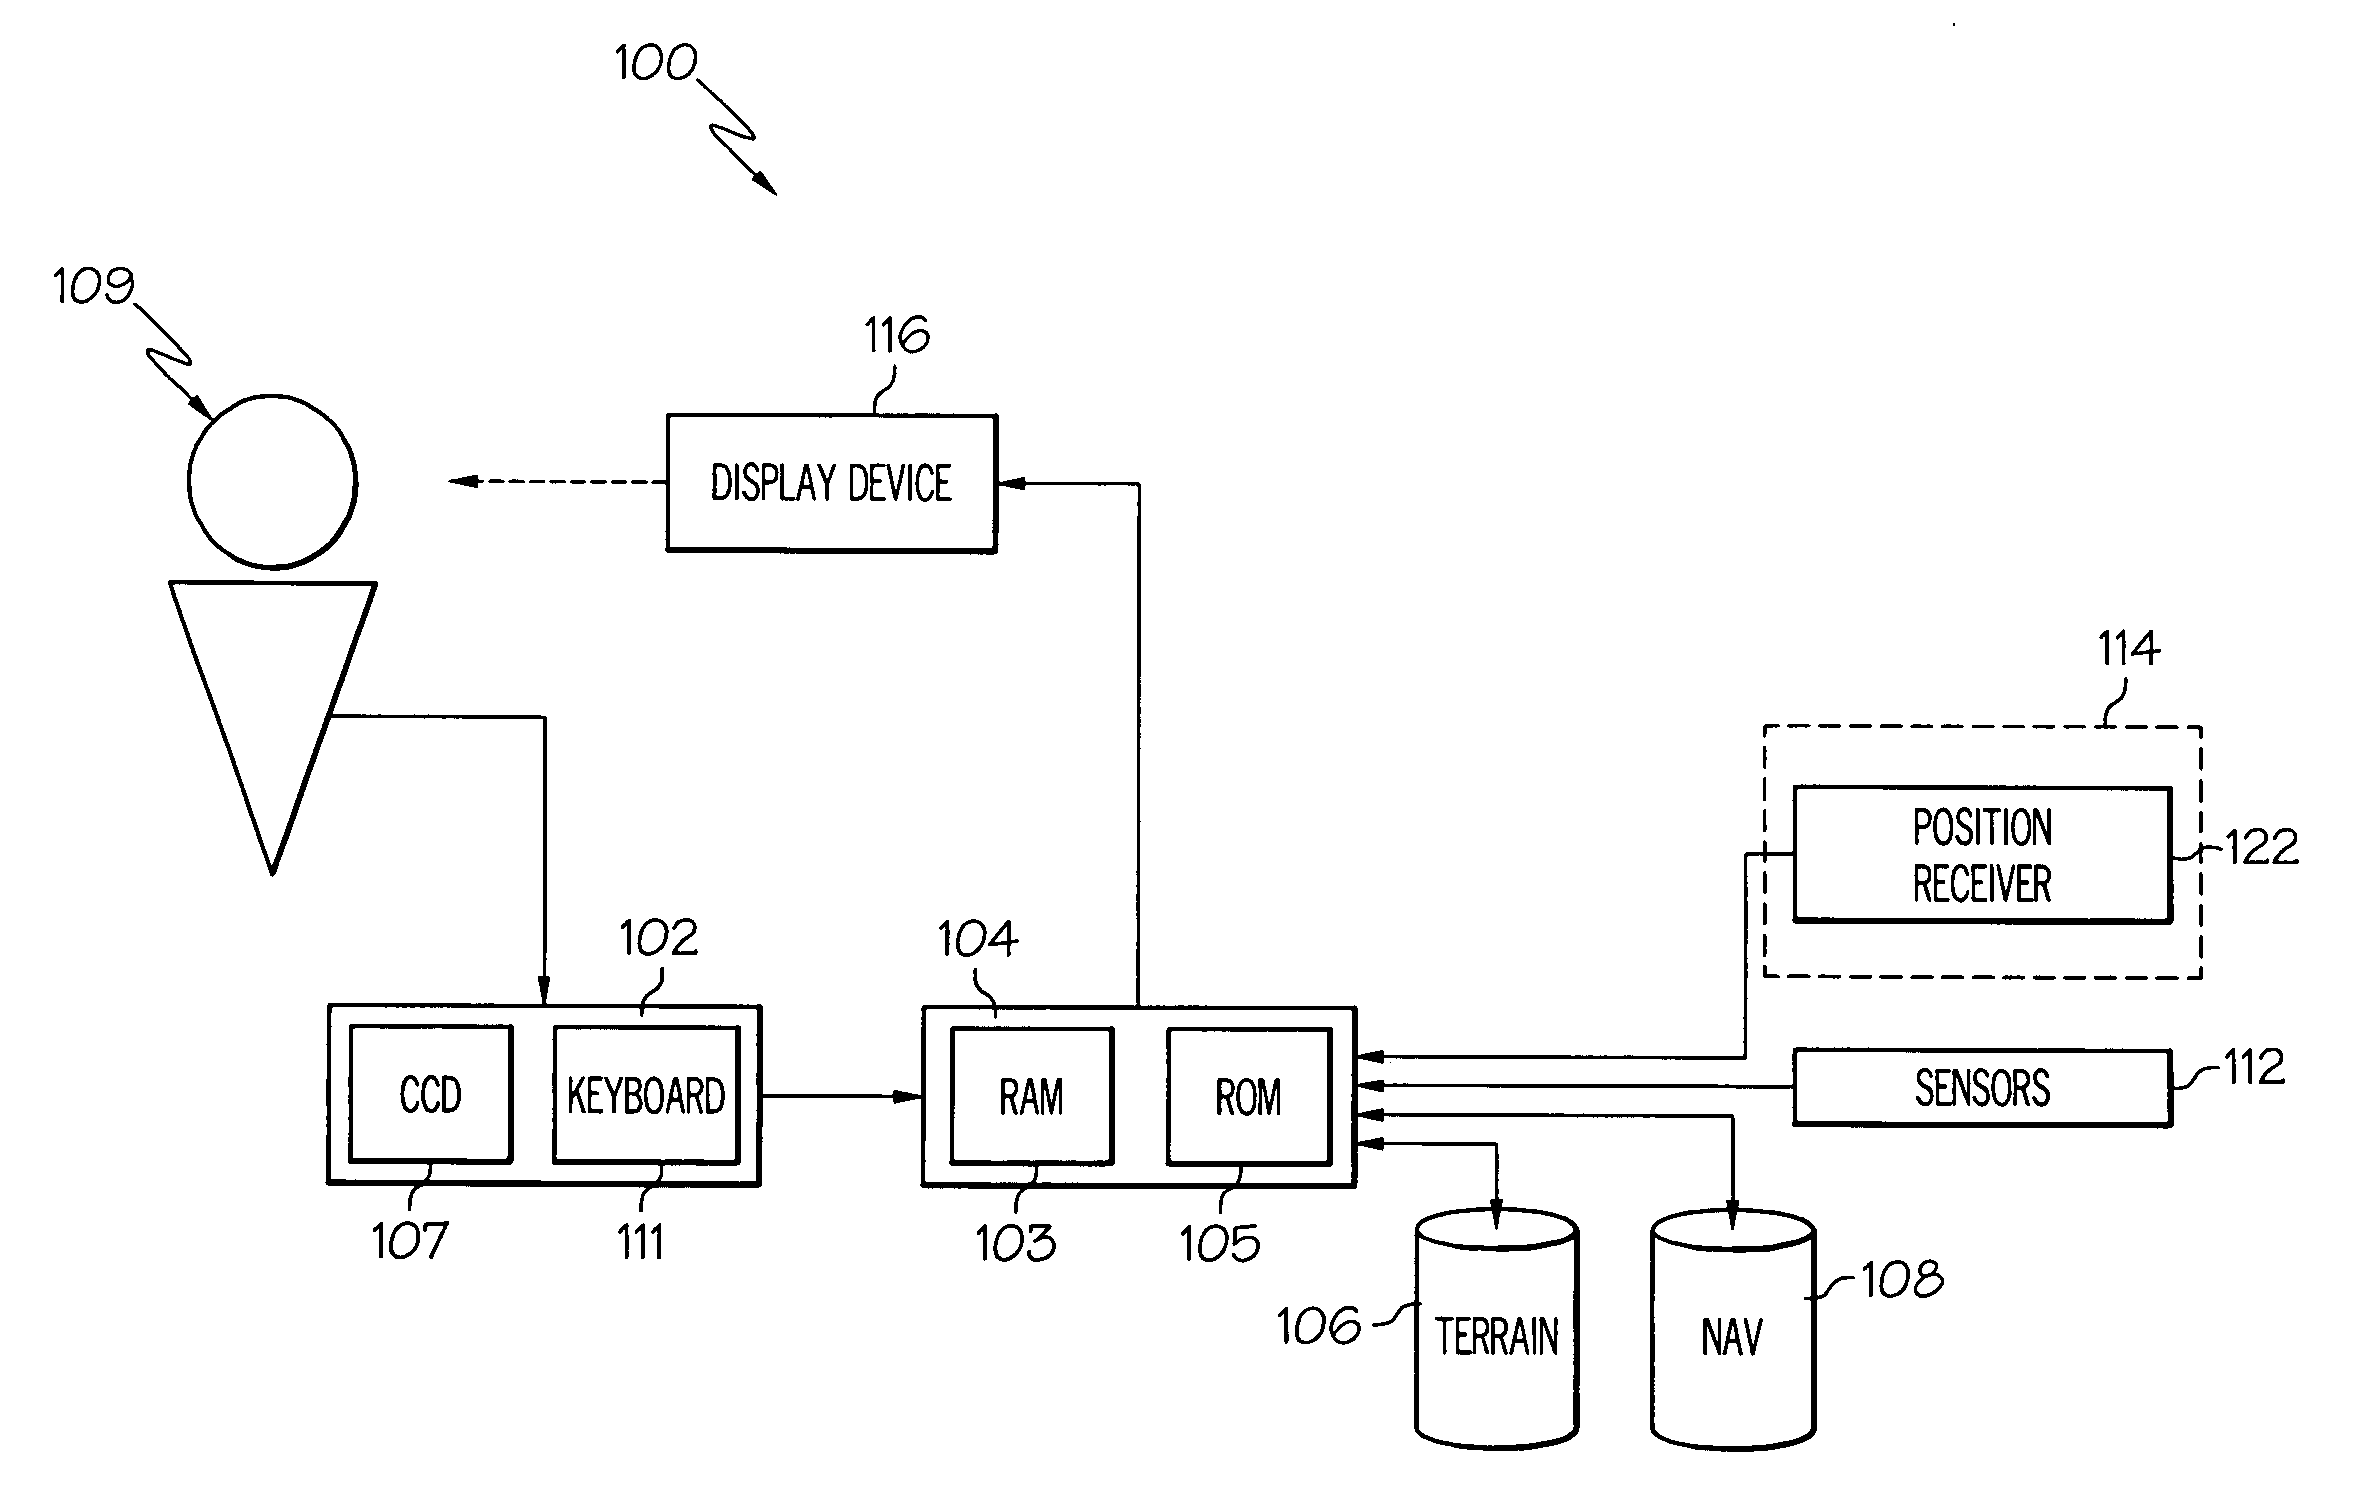 Method for providing search area coverage information